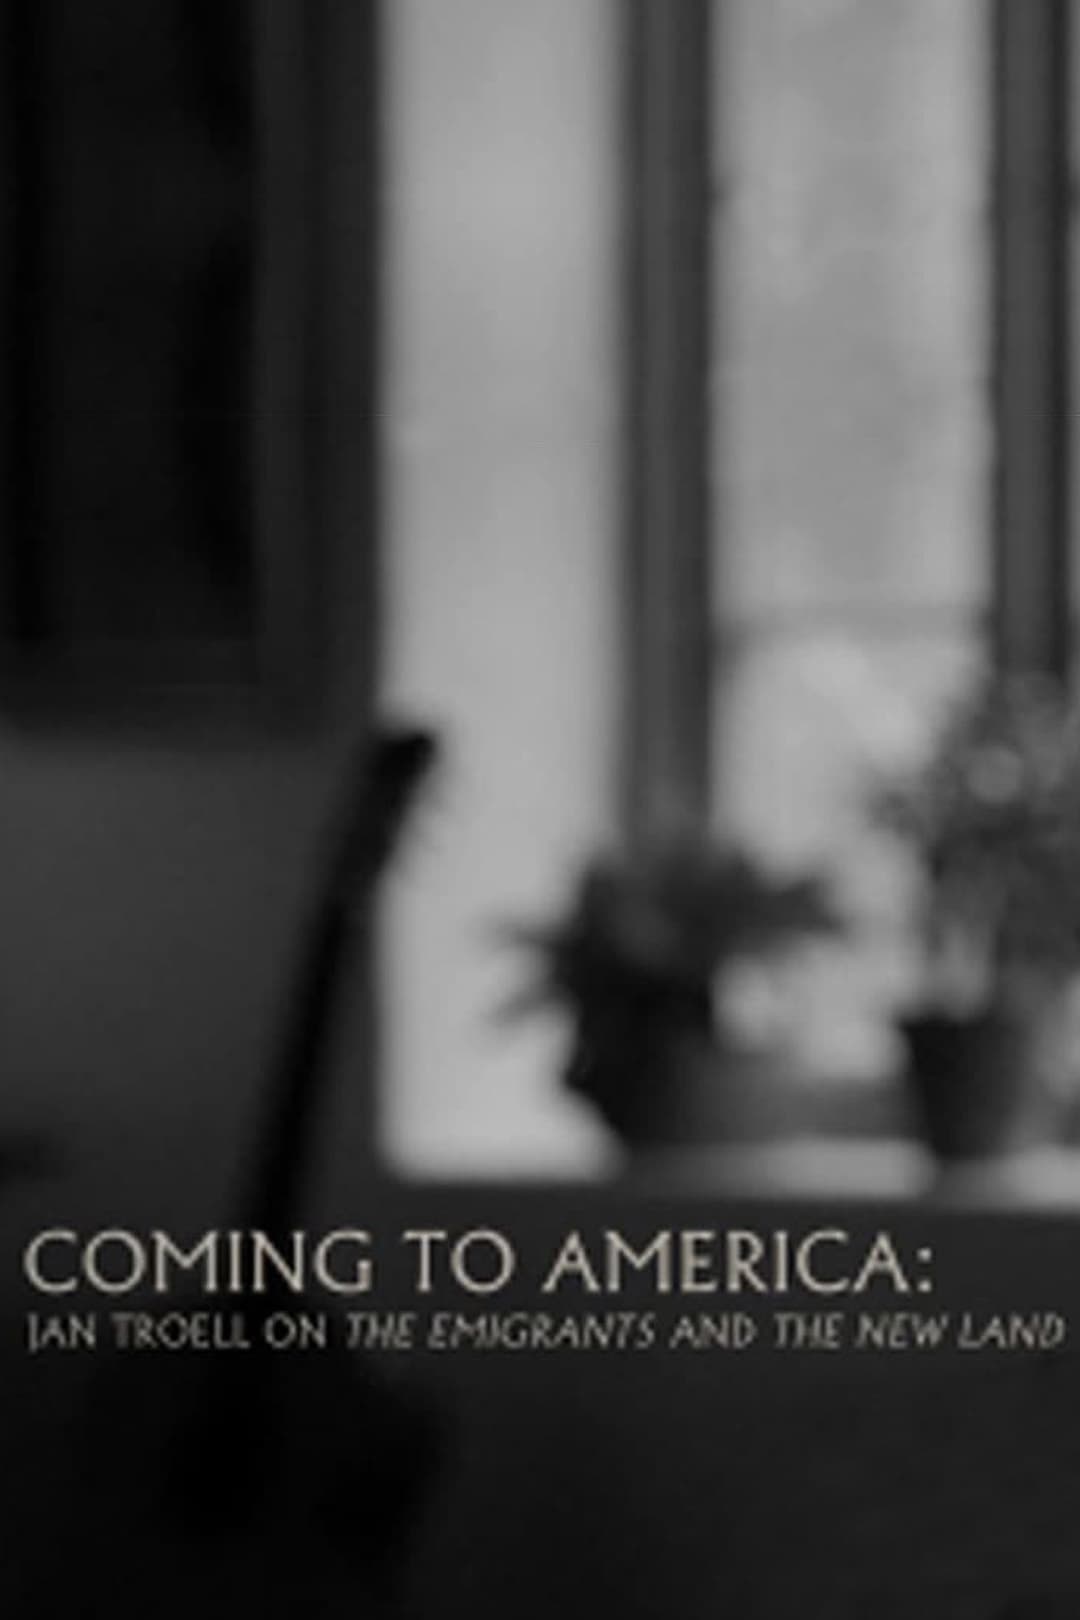 Coming to America: Jan Troell on 'The Emigrants' and 'The New Land'